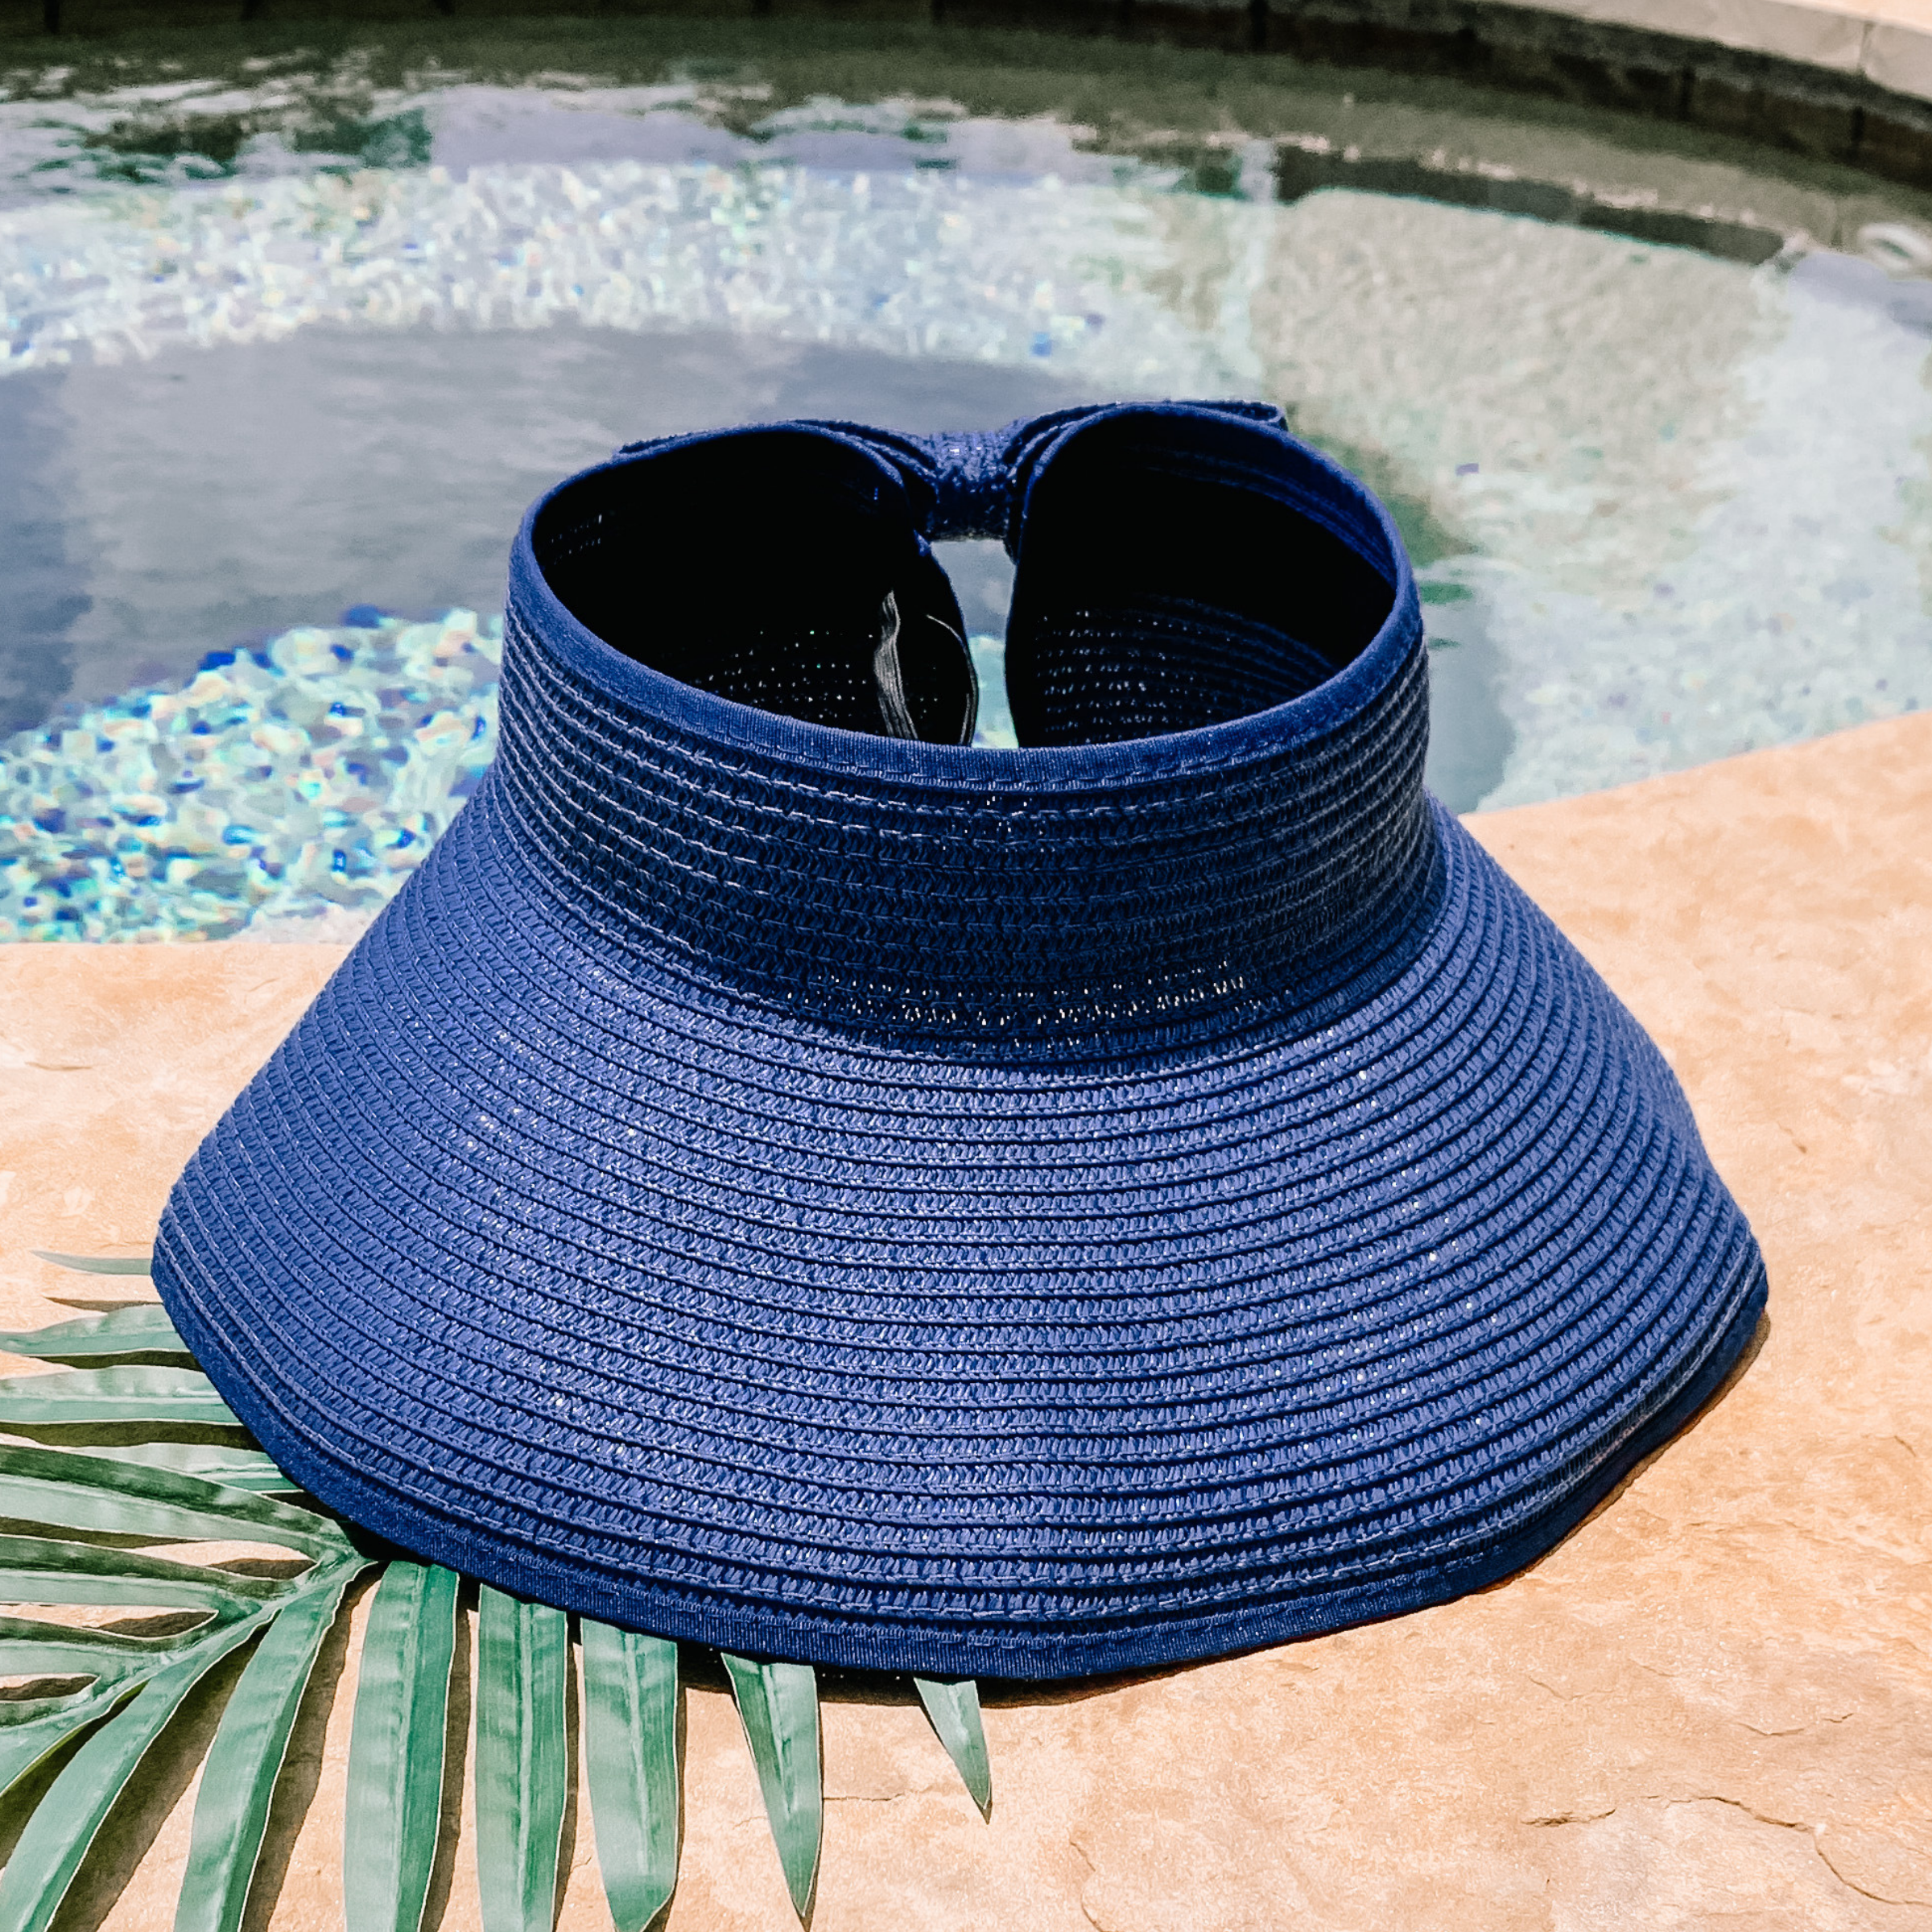 Navy blue, woven velcro visor that is pictured with a green leaf under it. This visor is pictured on a a tan rock in front of a pool.